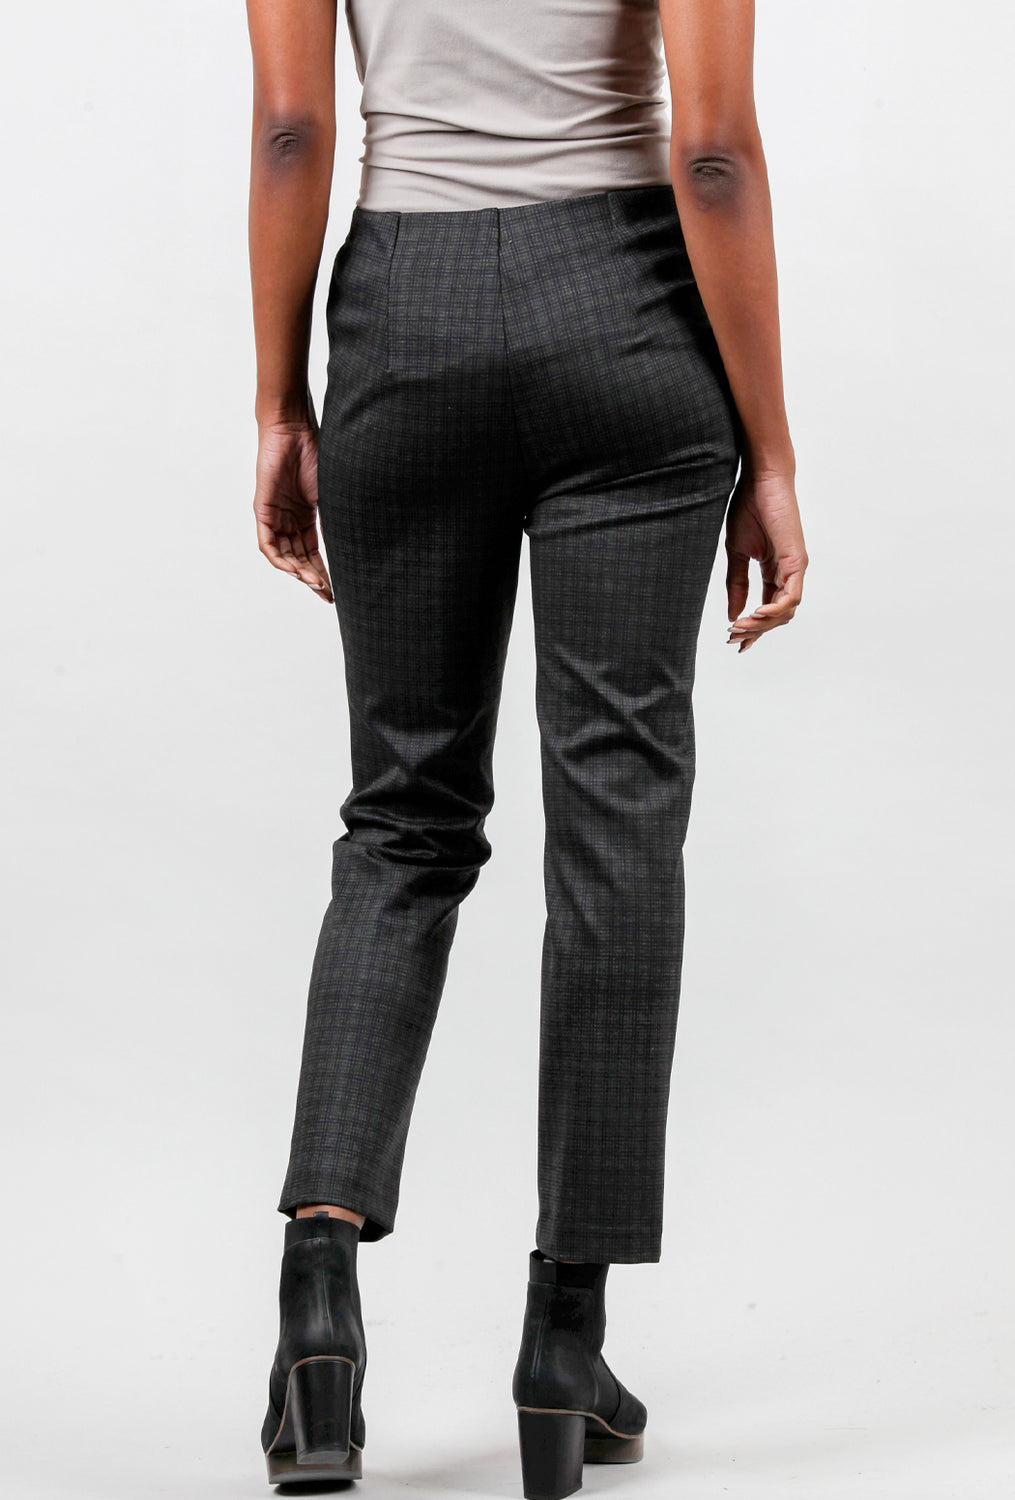 Check Pattern Ankle Pant, Charcoal